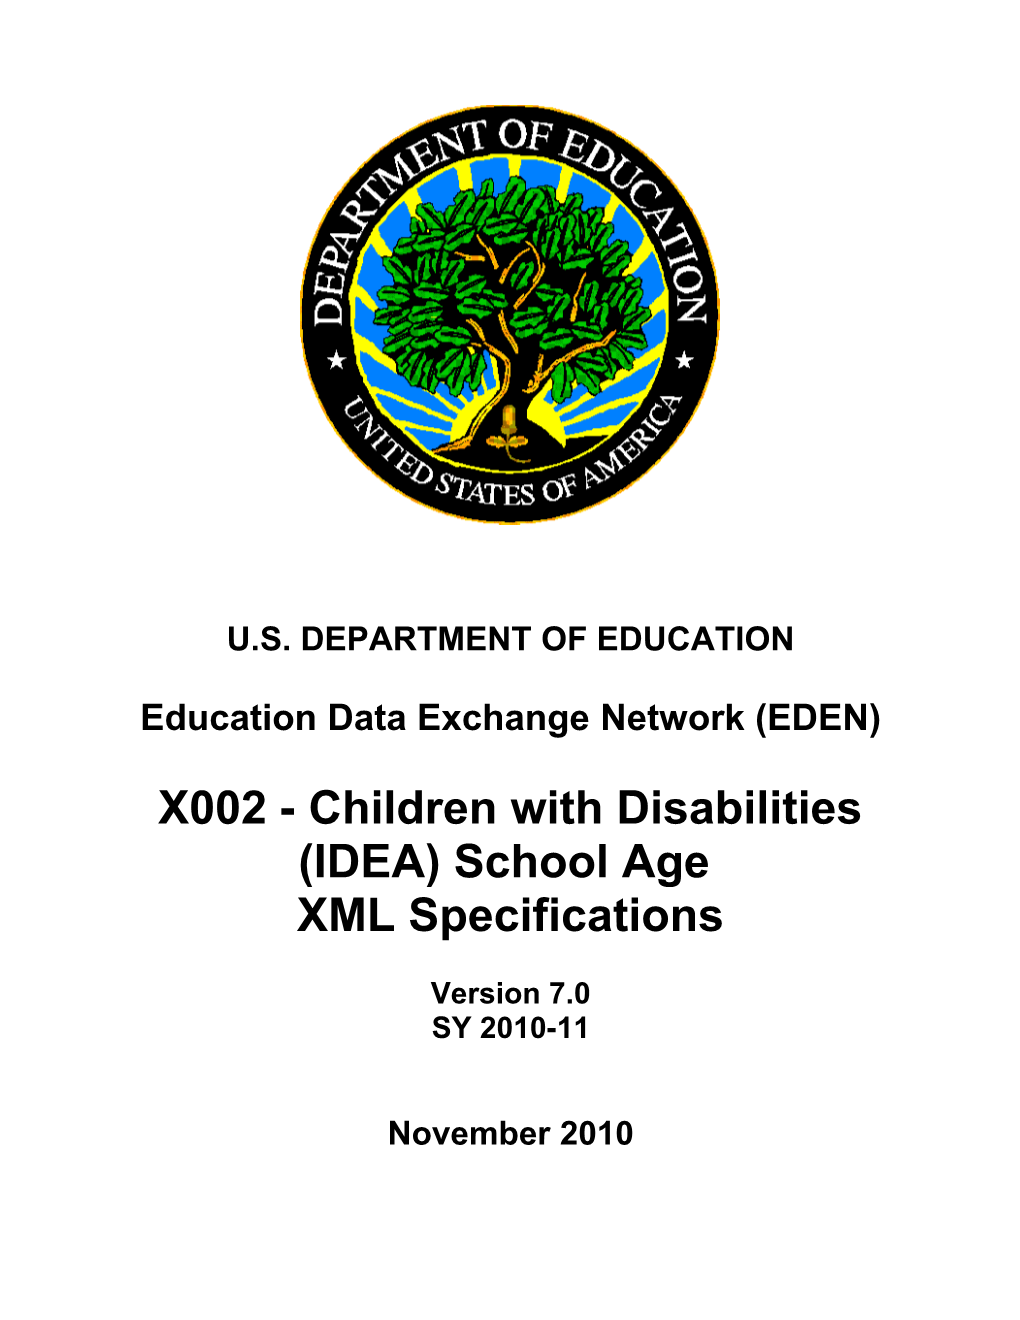 X002 - Children with Disabilities (IDEA) School Age XML Specifications (MS Word)